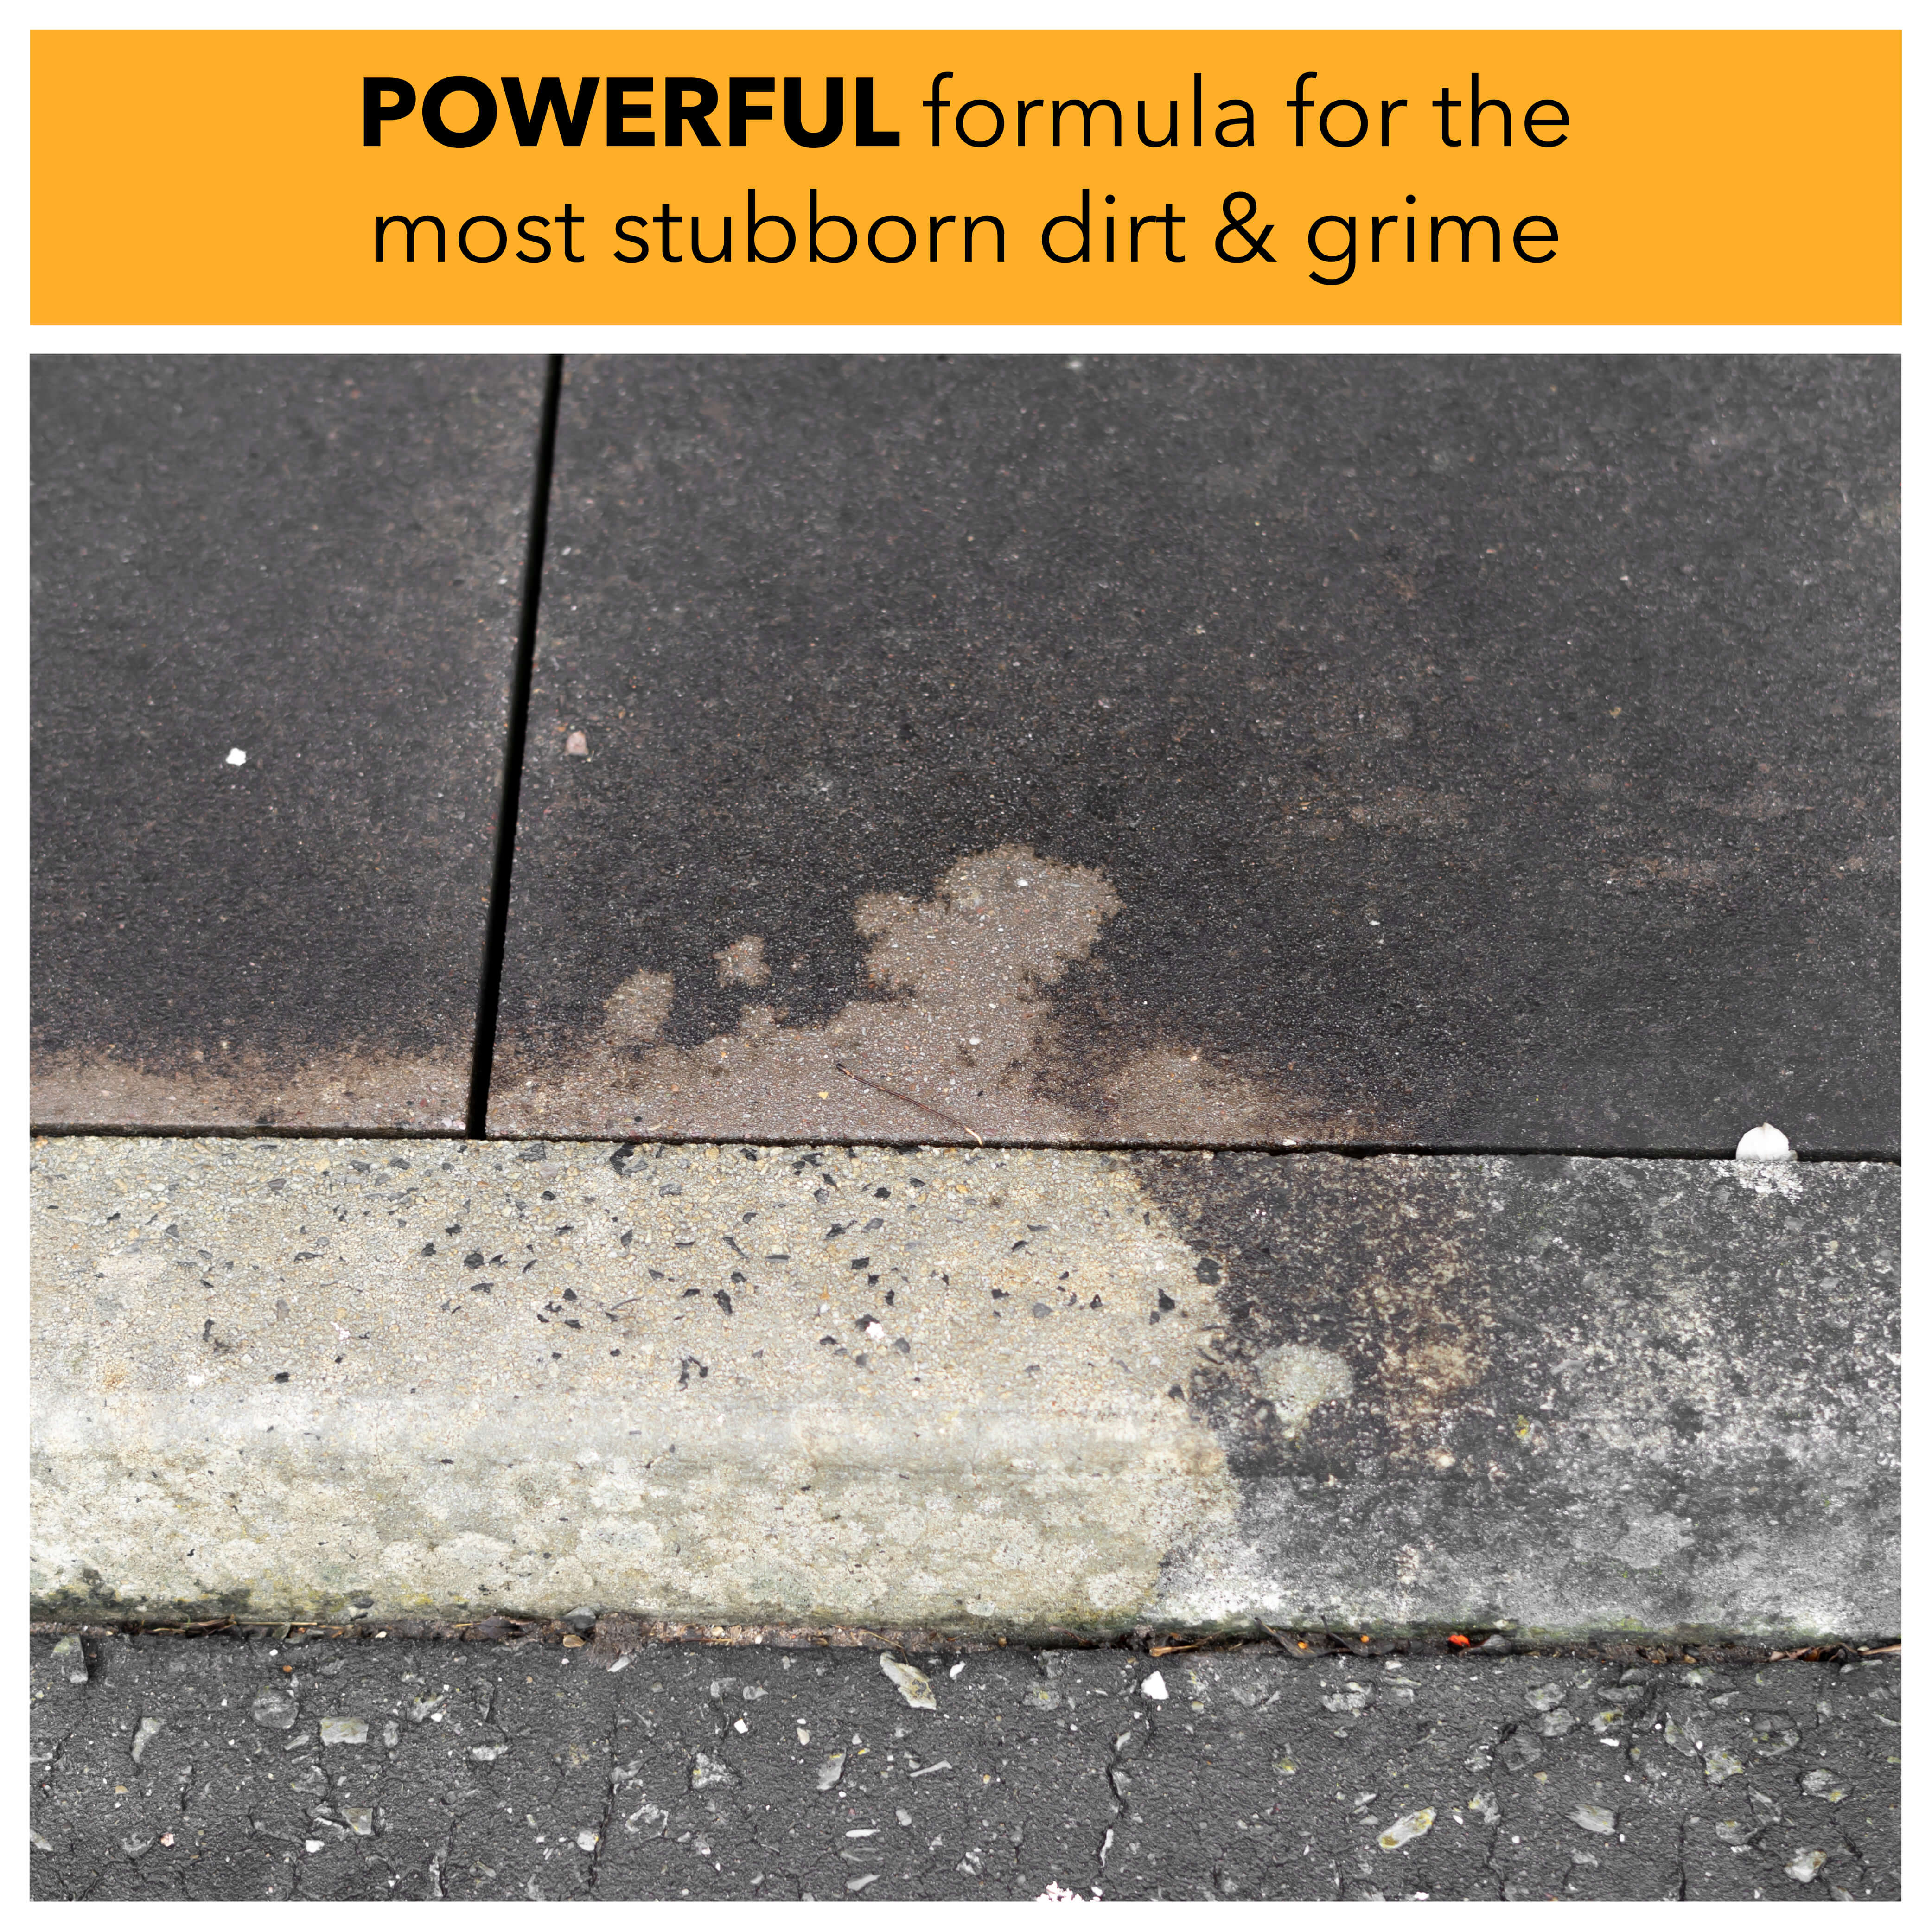 Powerful formula for the most stubborn dirt & grime